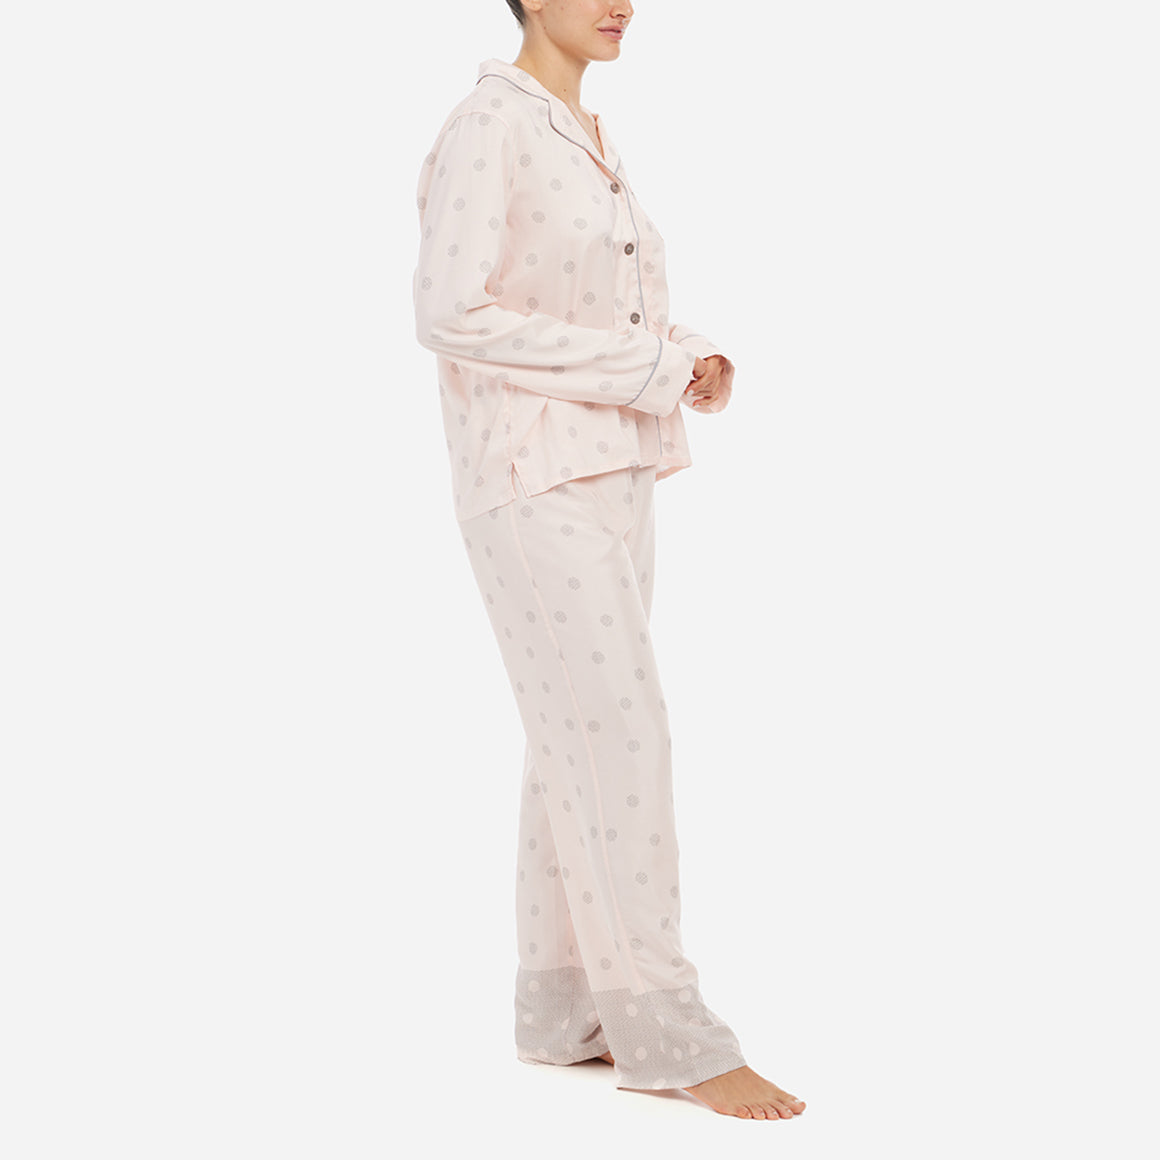 The classic yet contemporary silhouette flatters all body types, and its relaxed fit allows for unrestricted movement and maximum comfort, ensuring you wake up feeling refreshed and rejuvenated. The button-down top exudes sophistication, while the notched collar adds a touch of refinement. The matching straight leg pants offer a modern and flattering look, while the elastic waistband provides a customized fit.